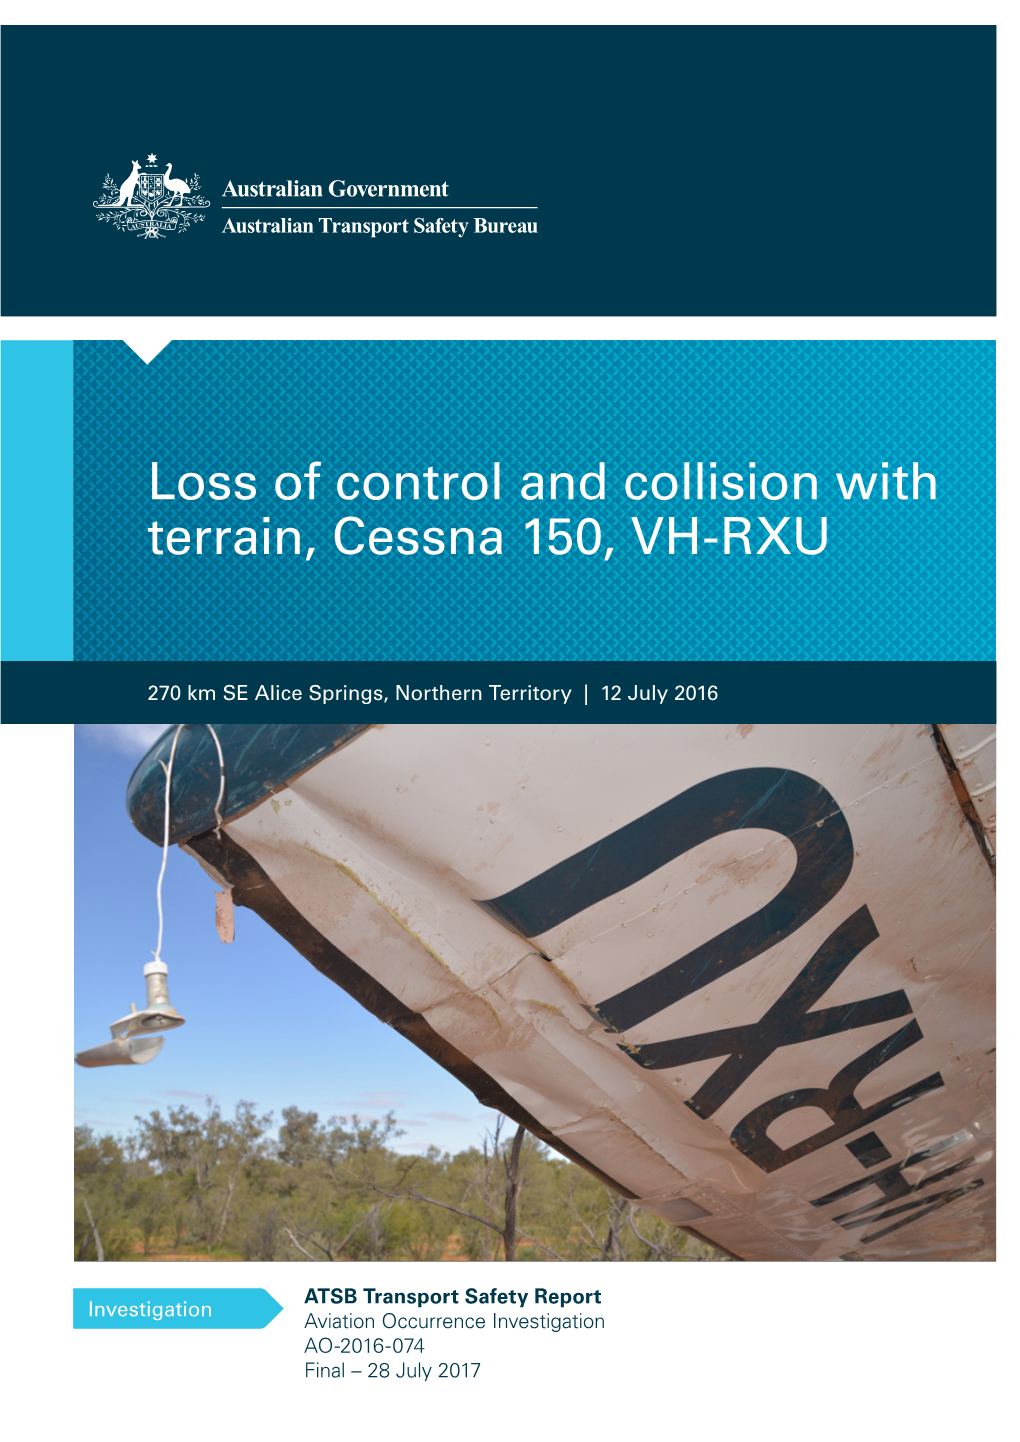 Loss of Control and Collision with Terrain, Cessna 150, VH-RXU, 270